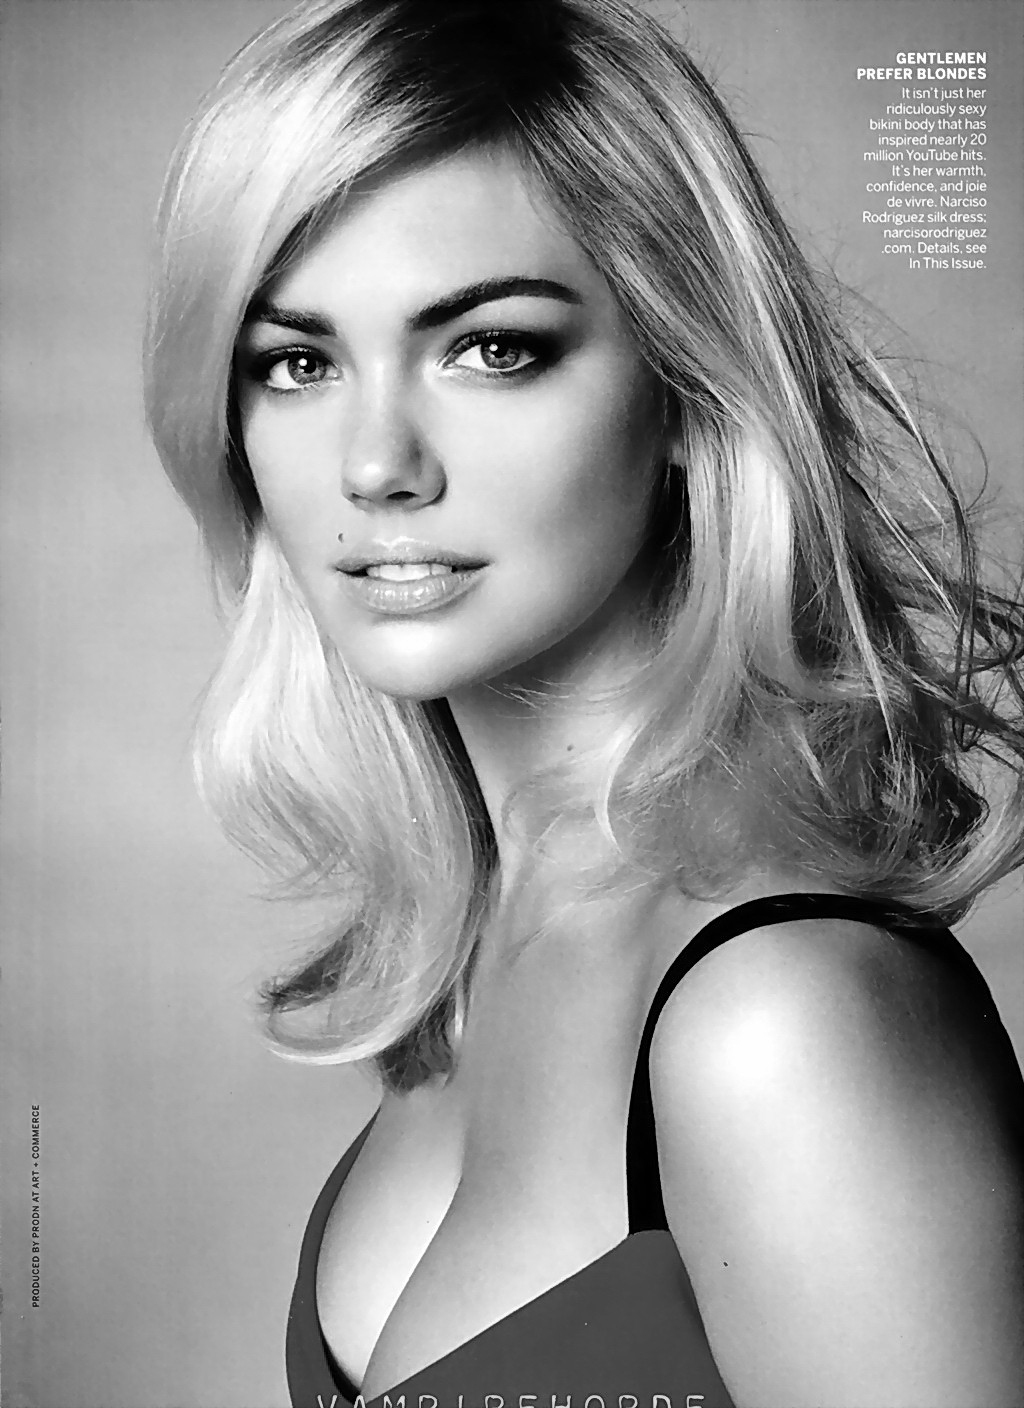 Kate Upton busting out in lingerie at Vogue magazine Italy November 2012 issue #75249380